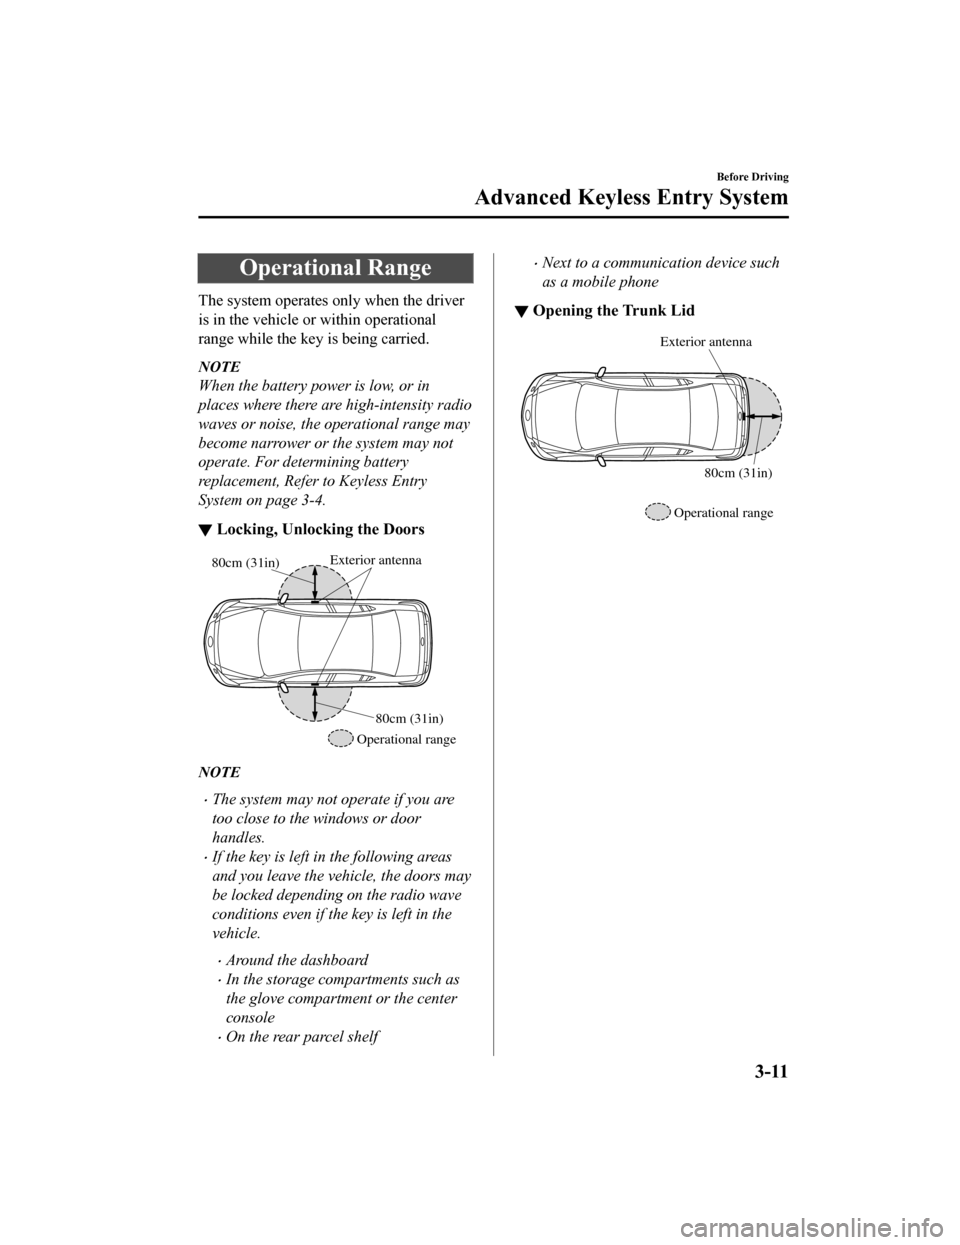 MAZDA MODEL 6 2020  Owners Manual (in English) Operational Range
The system operates only when the driver
is in the vehicle or within operational
range while the key is being carried.
NOTE
When the battery power is low, or in
places where there ar